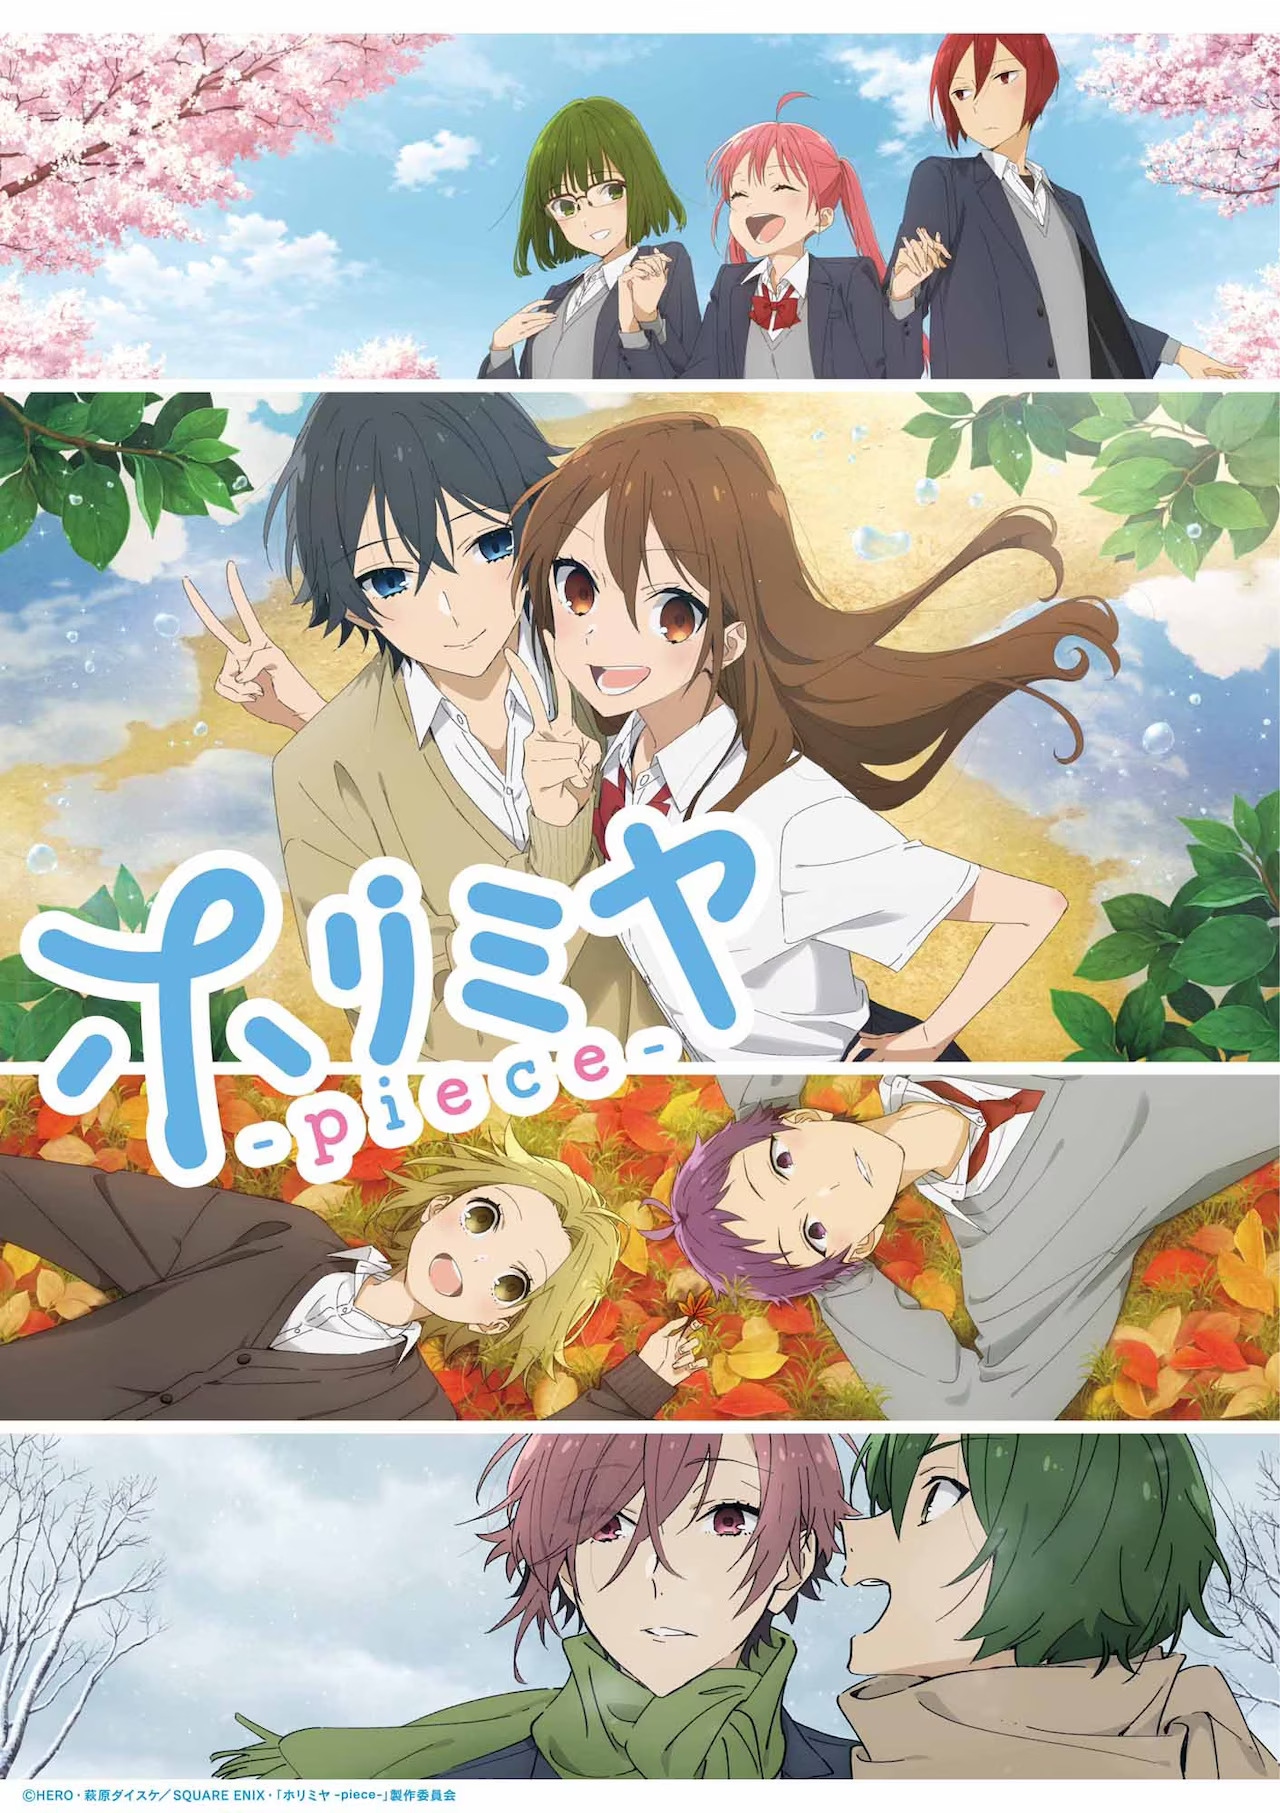 New Promo for 'Horimiya -piece-' Reveals Theme Songs and Release Date